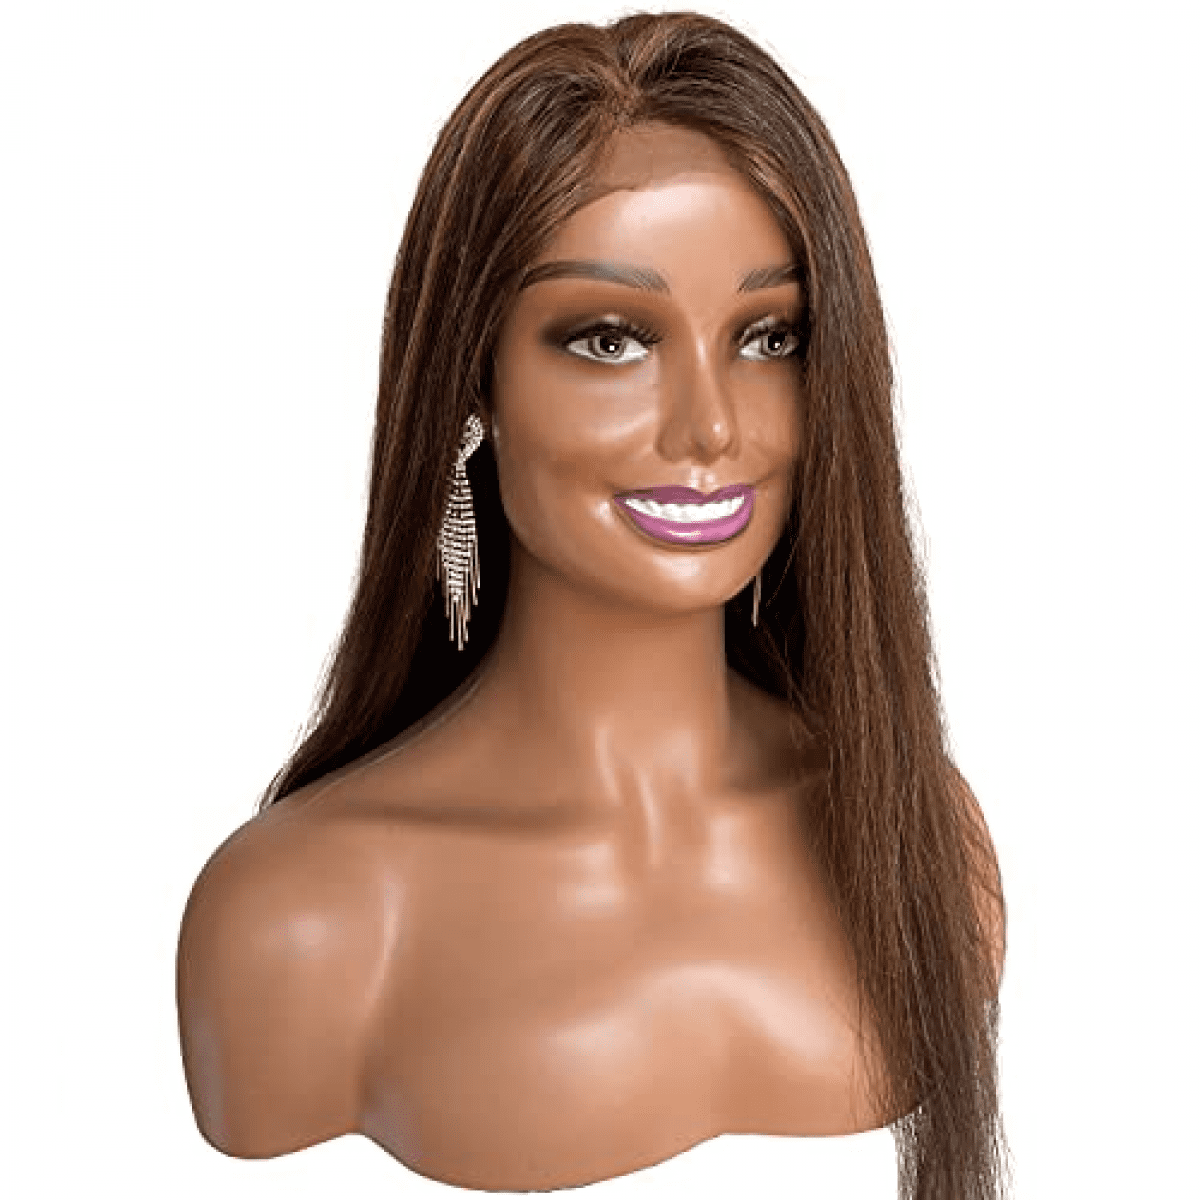 Mannequin Head With Brunette Wig Stock Photo - Download Image Now